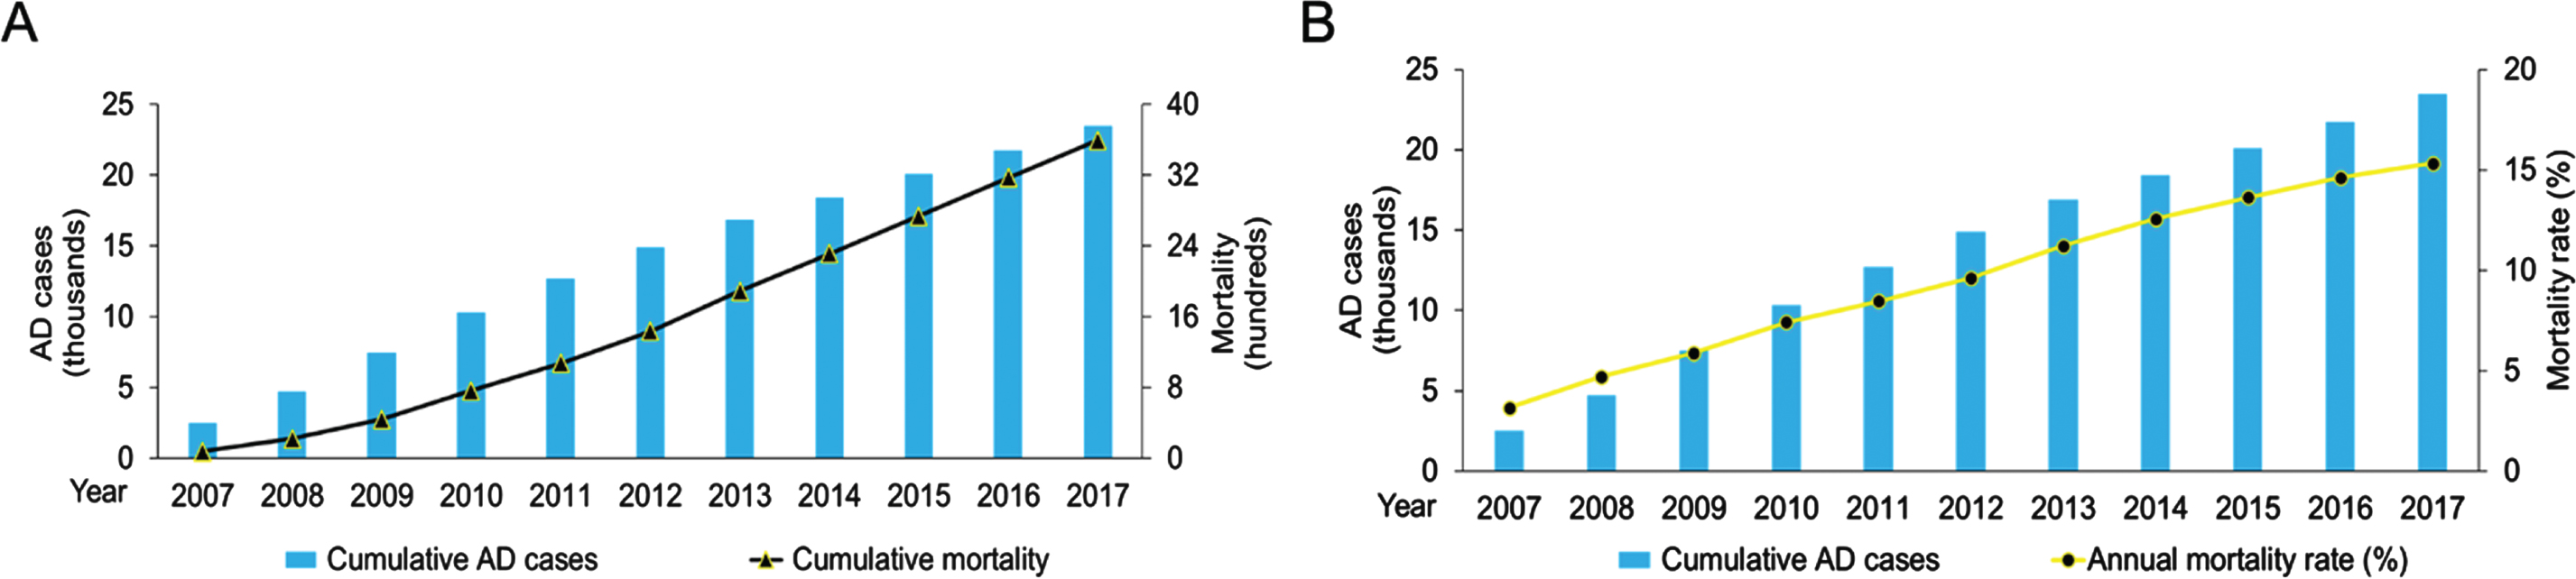 Alzheimer’s disease (AD) mortality in Hong Kong from 2007–2017. A) Cumulative AD cases (blue bars) and cumulative mortality of patients with AD (black line with triangles) between January 1, 2007 and December 31, 2017. B) Cumulative AD cases (blue bars) and annual mortality rates (yellow line with circles).